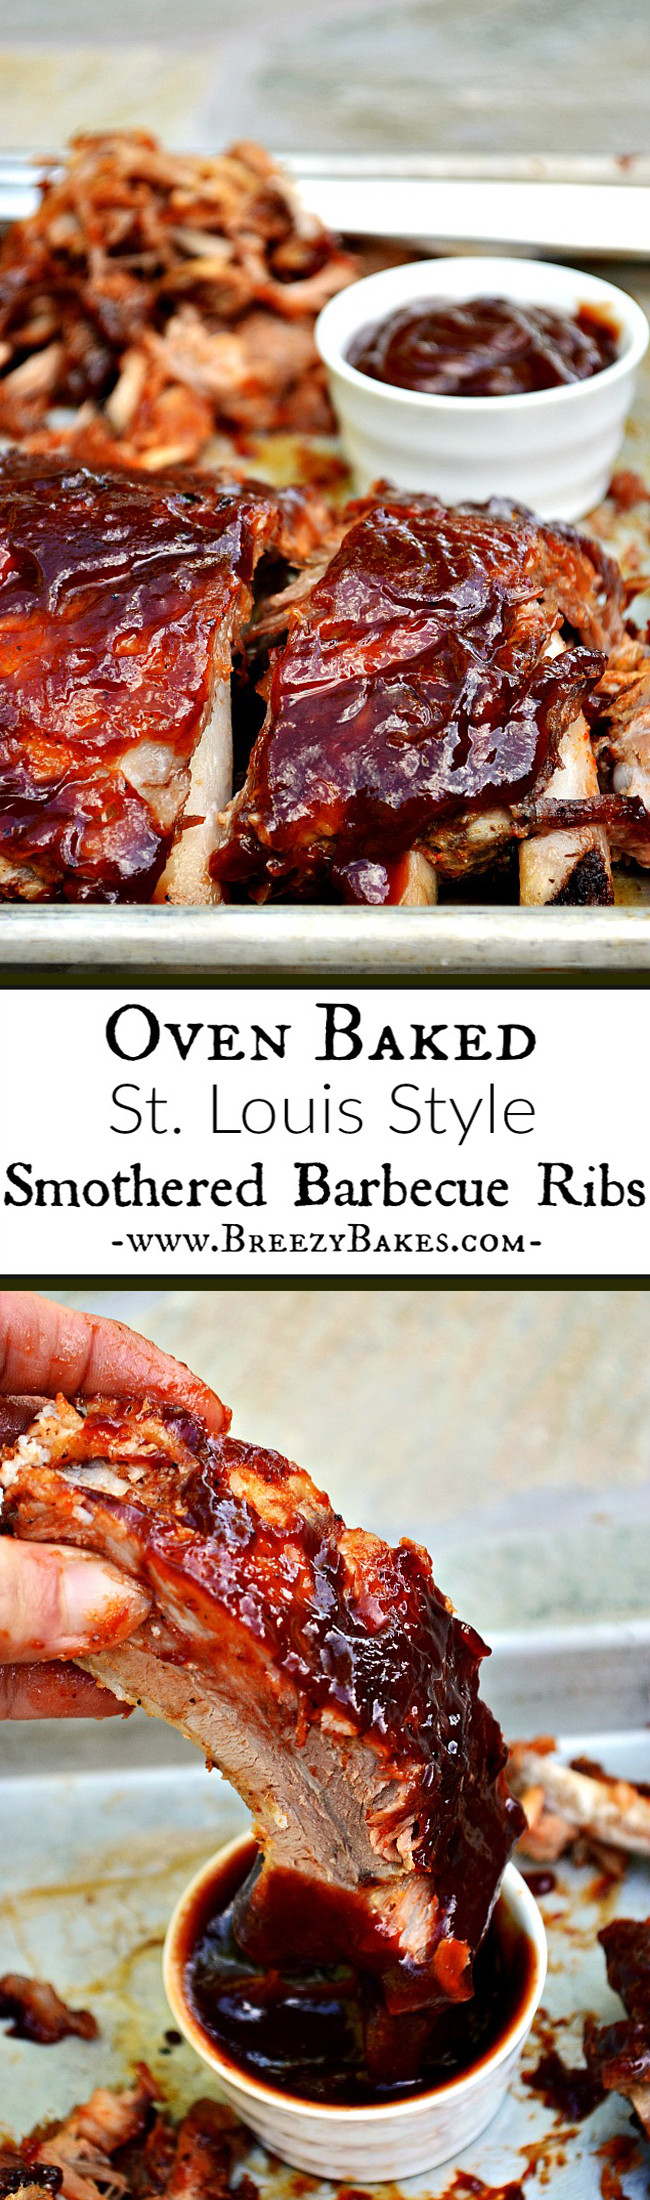 Bbq Pork Ribs Oven
 Oven Baked Barbecue Pork Ribs Breezy Bakes